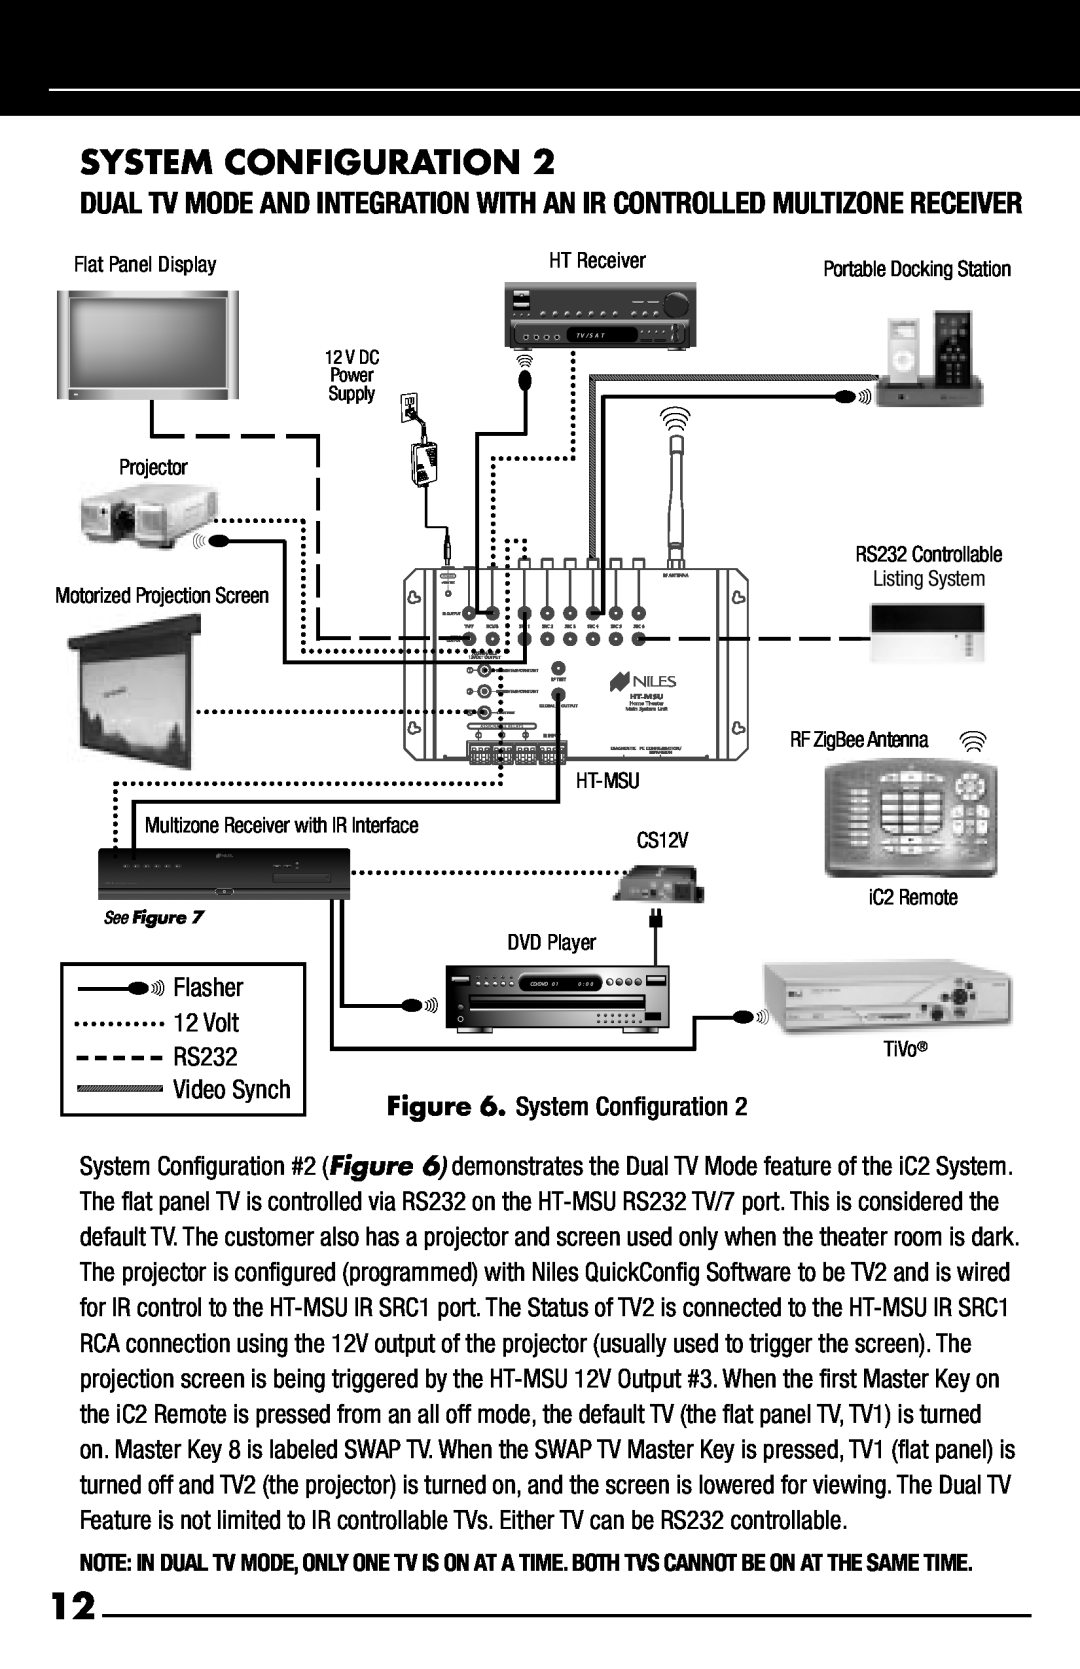 Niles Audio iC2 System Configuration, Flasher, Volt, RS232, Video Synch, System Conﬁguration, Flat Panel Display, Ht-Msu 